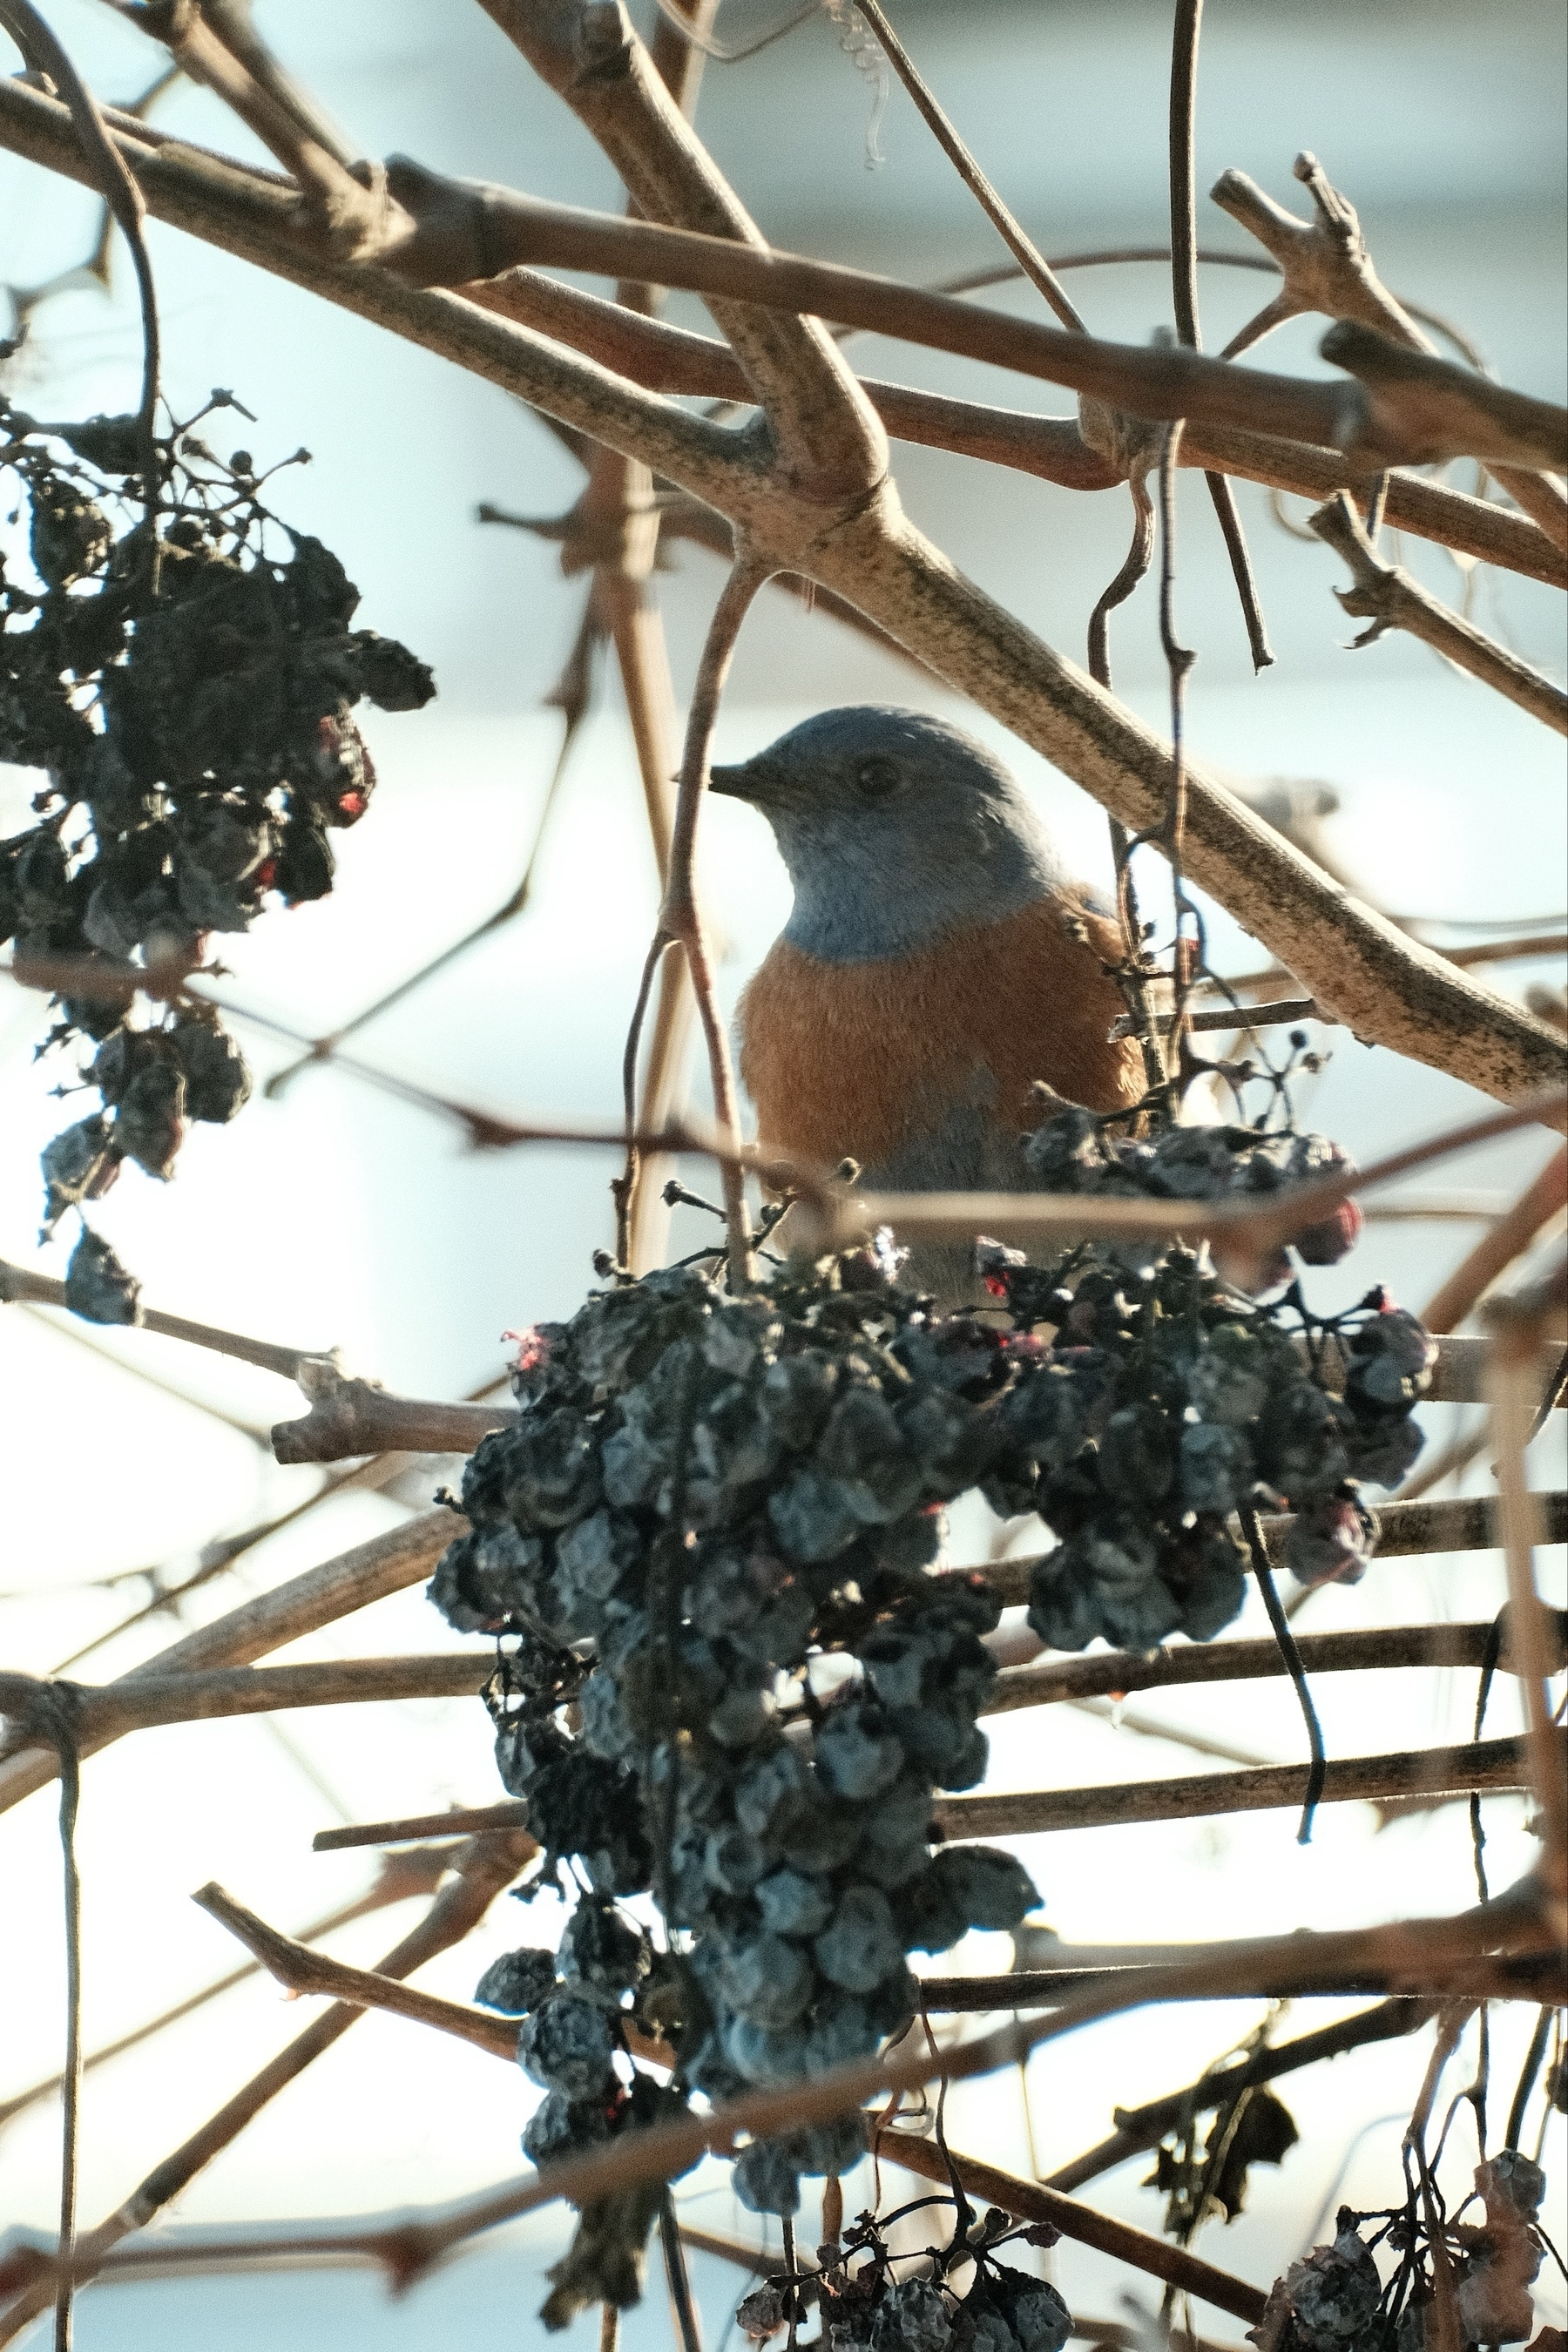 A Western Blue Bird in defoliated grape vines, showing off its rust red chest atop a bunch of dried out grapes. The bird has a blue head and is looking to the left.